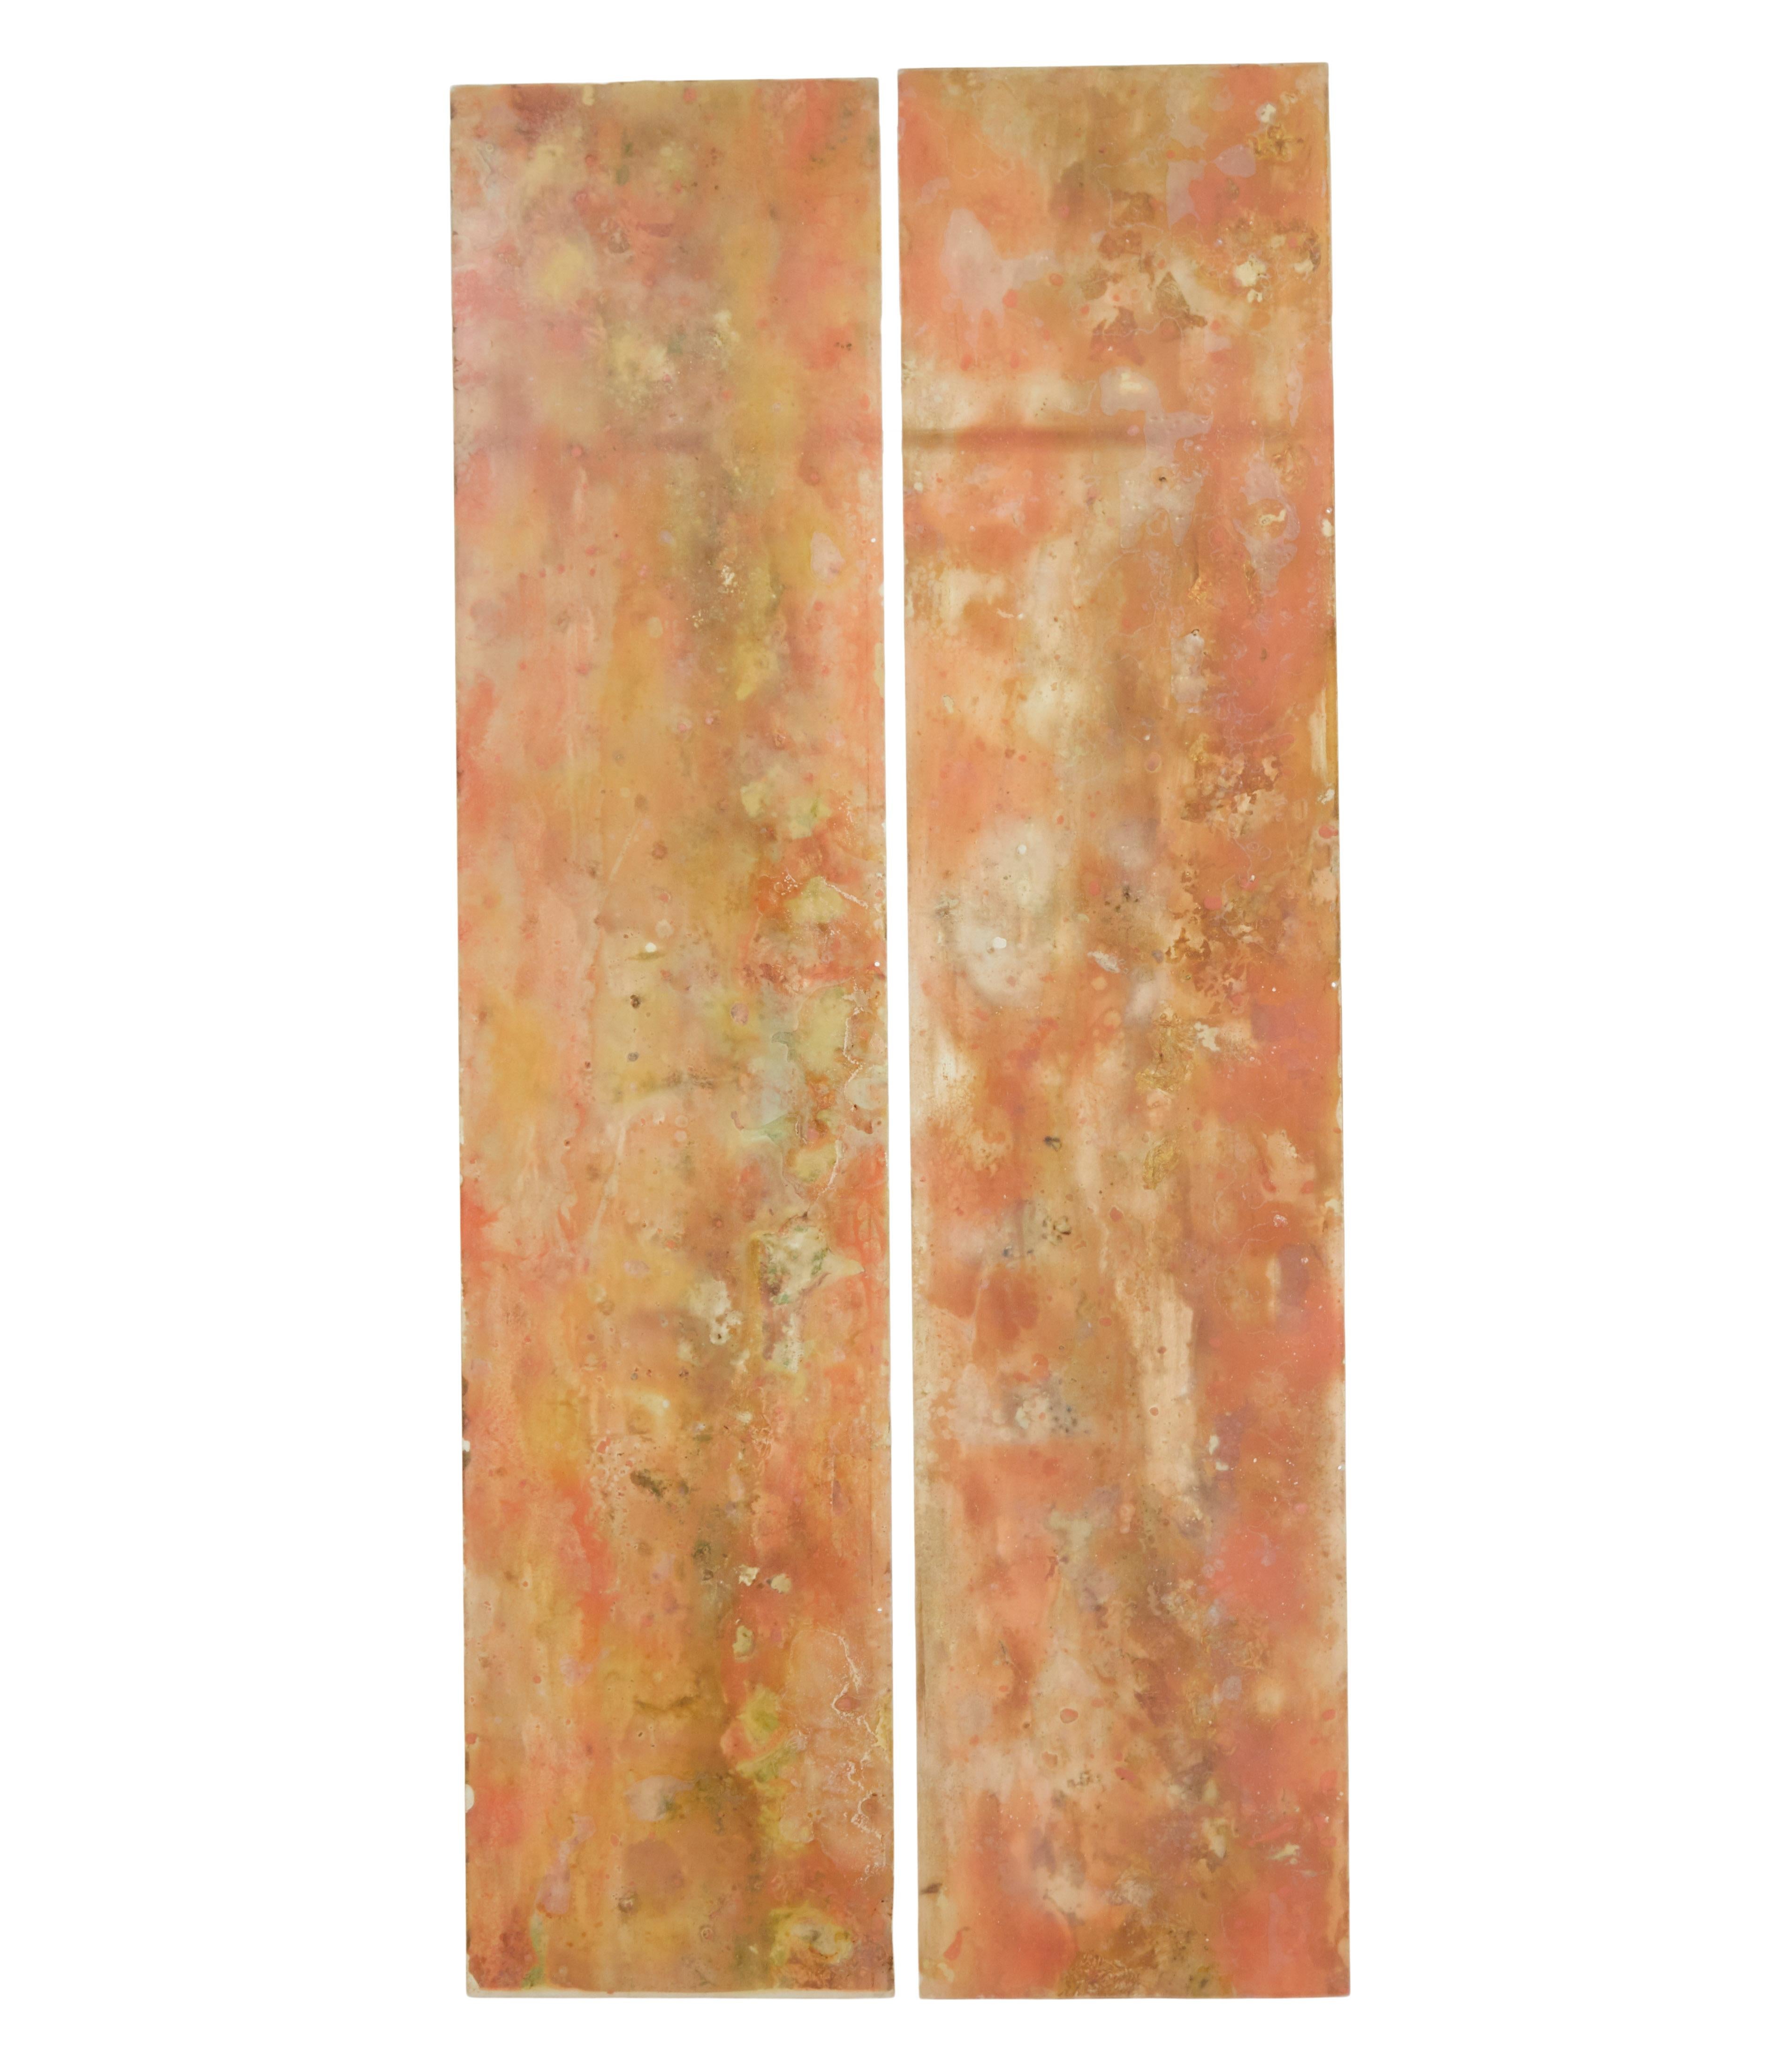 Pair of french 1950's abstract acrylic panels.

Screens are made from browns, oranges, yellows and greens with gold leaf in places.

They have been photographed with front light, front light with a black back drop behind, and then lit from behind.